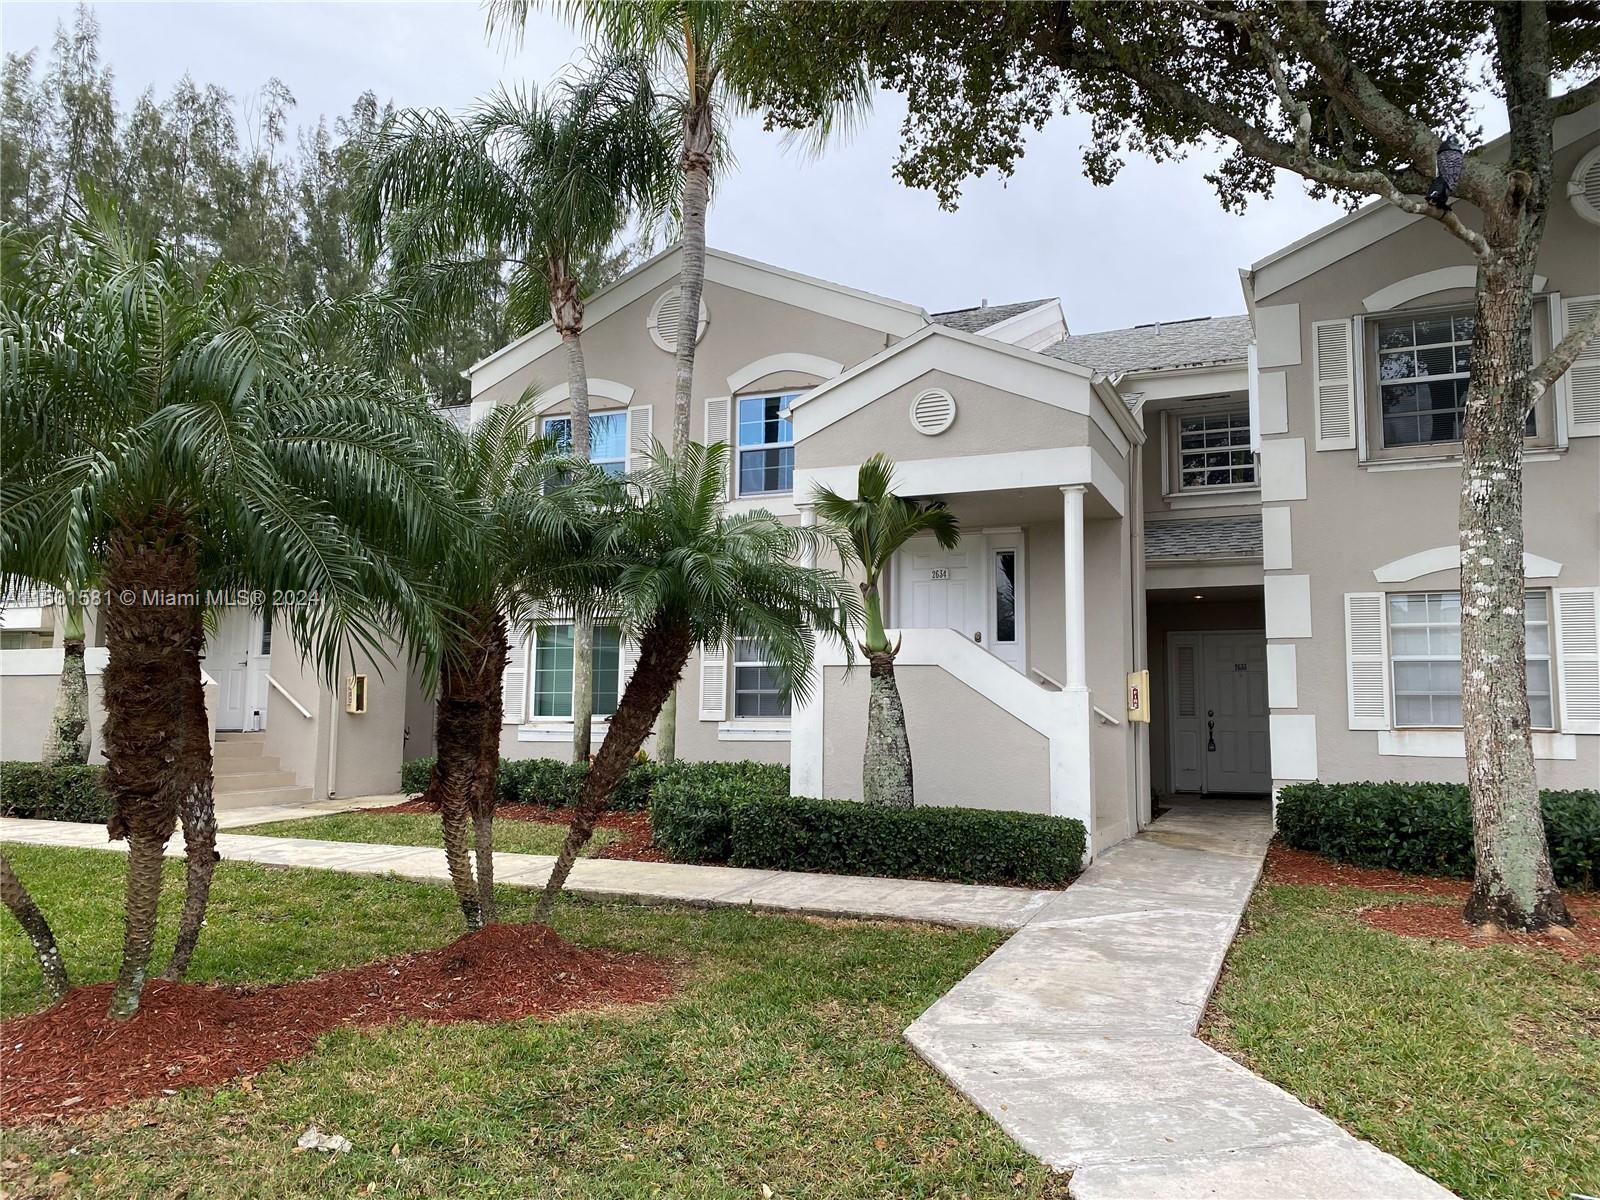 First floor 2 bedroom, 2 bath condo located in exclusive Center Gate at Keysgate. Tile & laminate floor throughout, spacious living room with screened balcony. Rent includes cable, internet, alarm, 24 hr gted and roving security, clubhouse, pool, gym and much more.